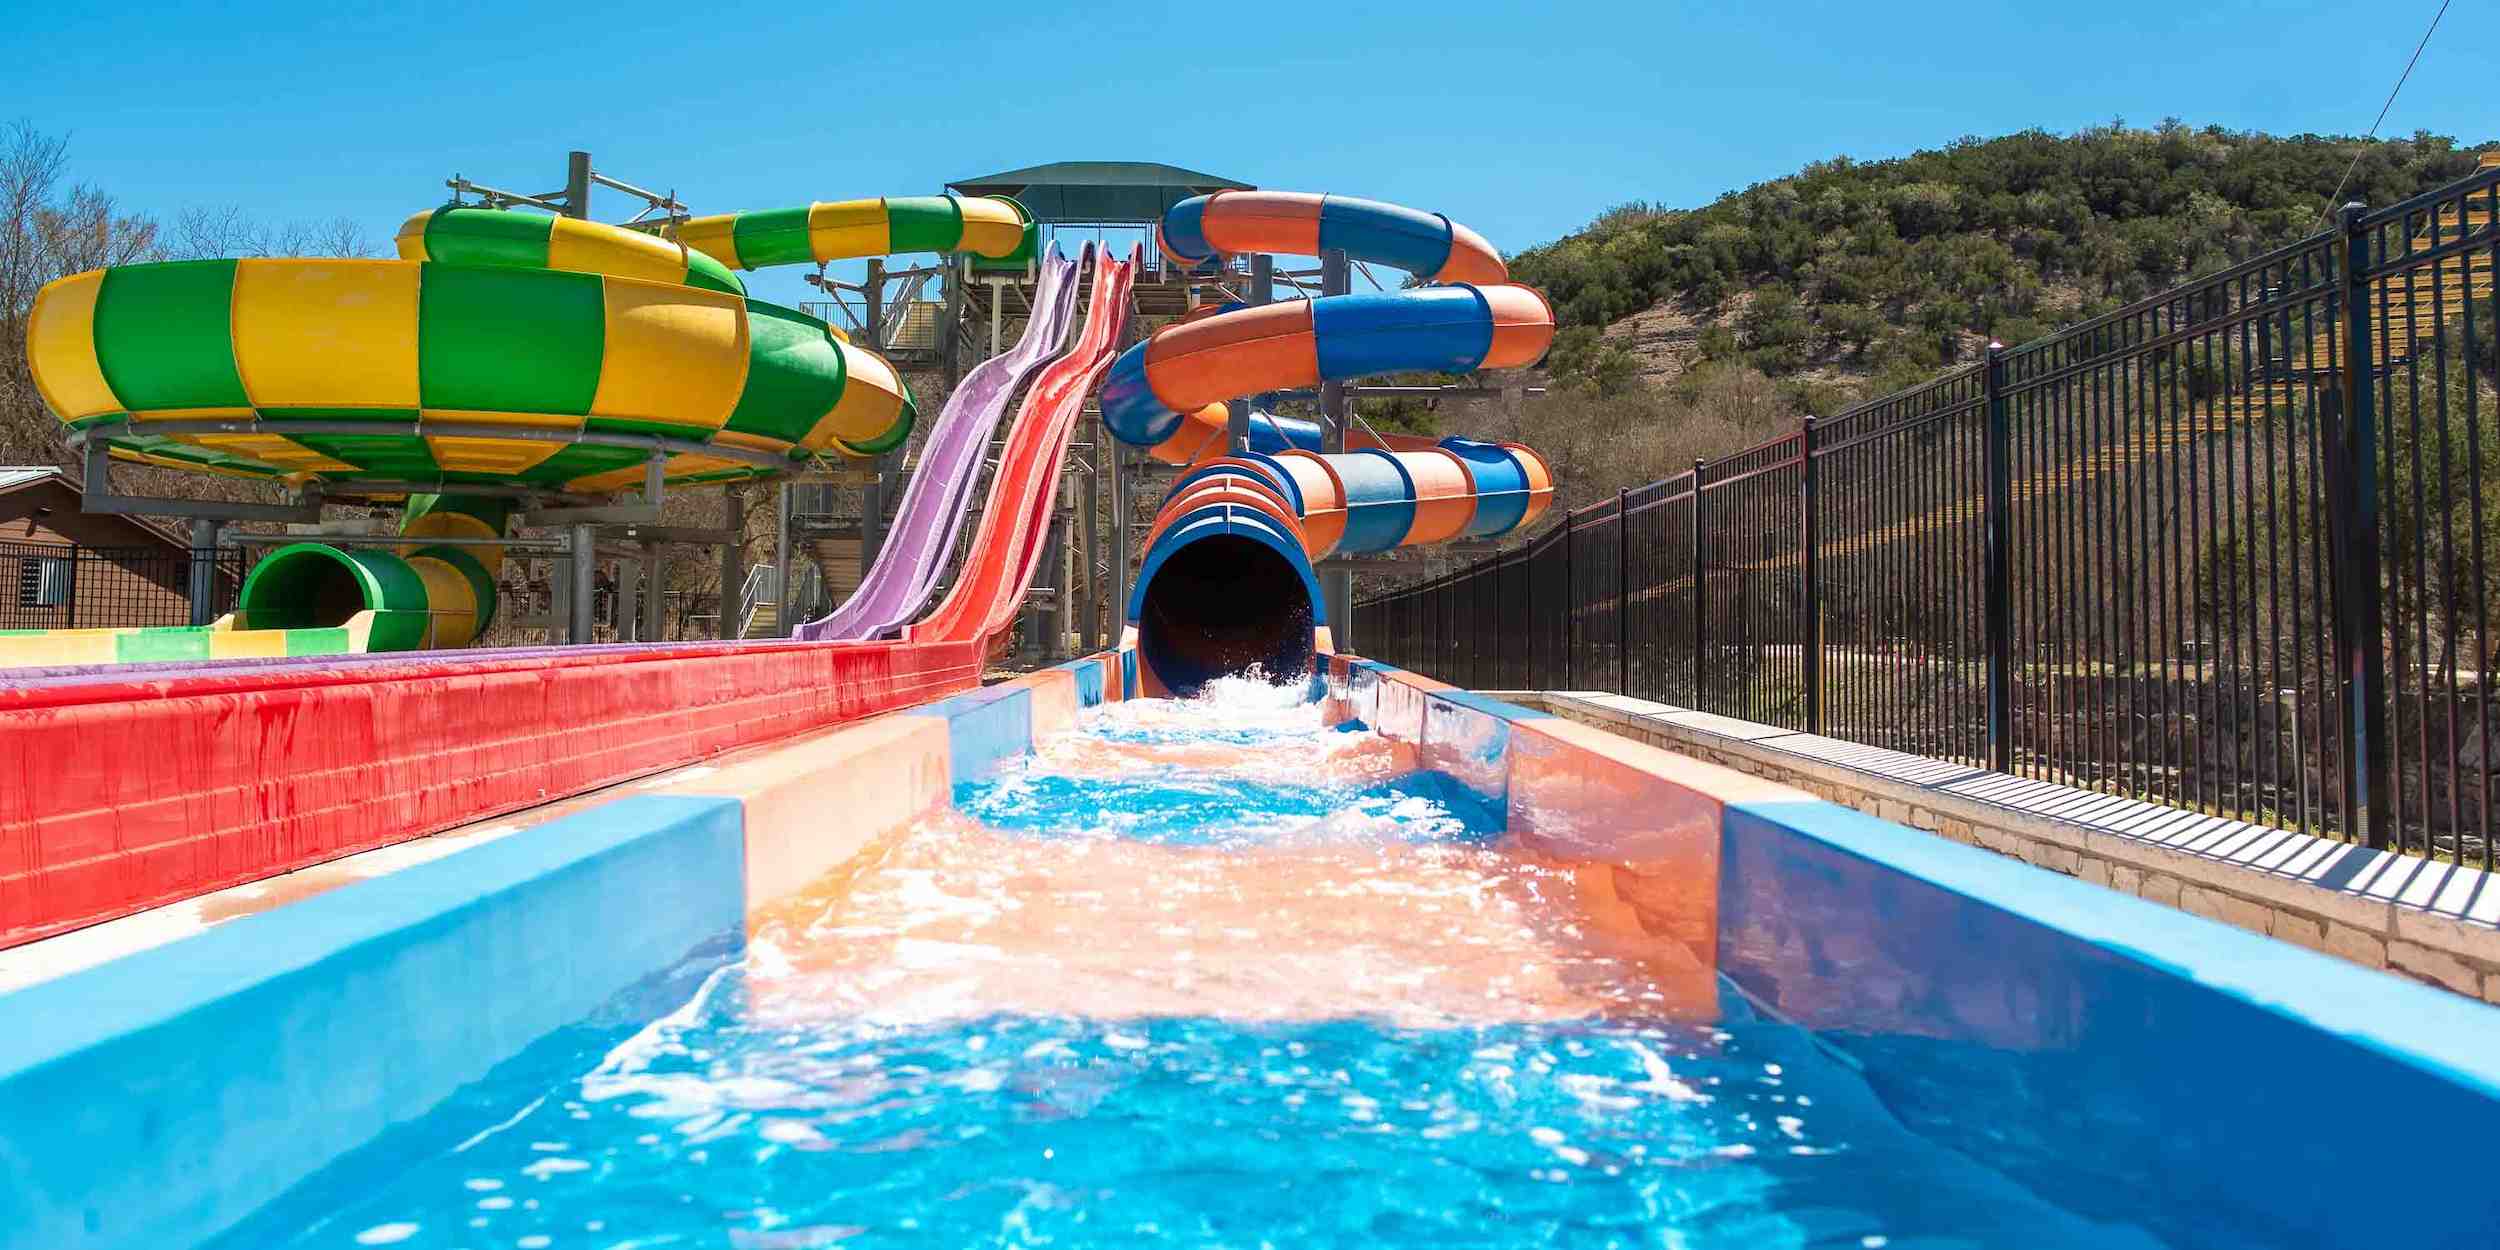 The water slides at Camp Fimfo Texas Hill Country